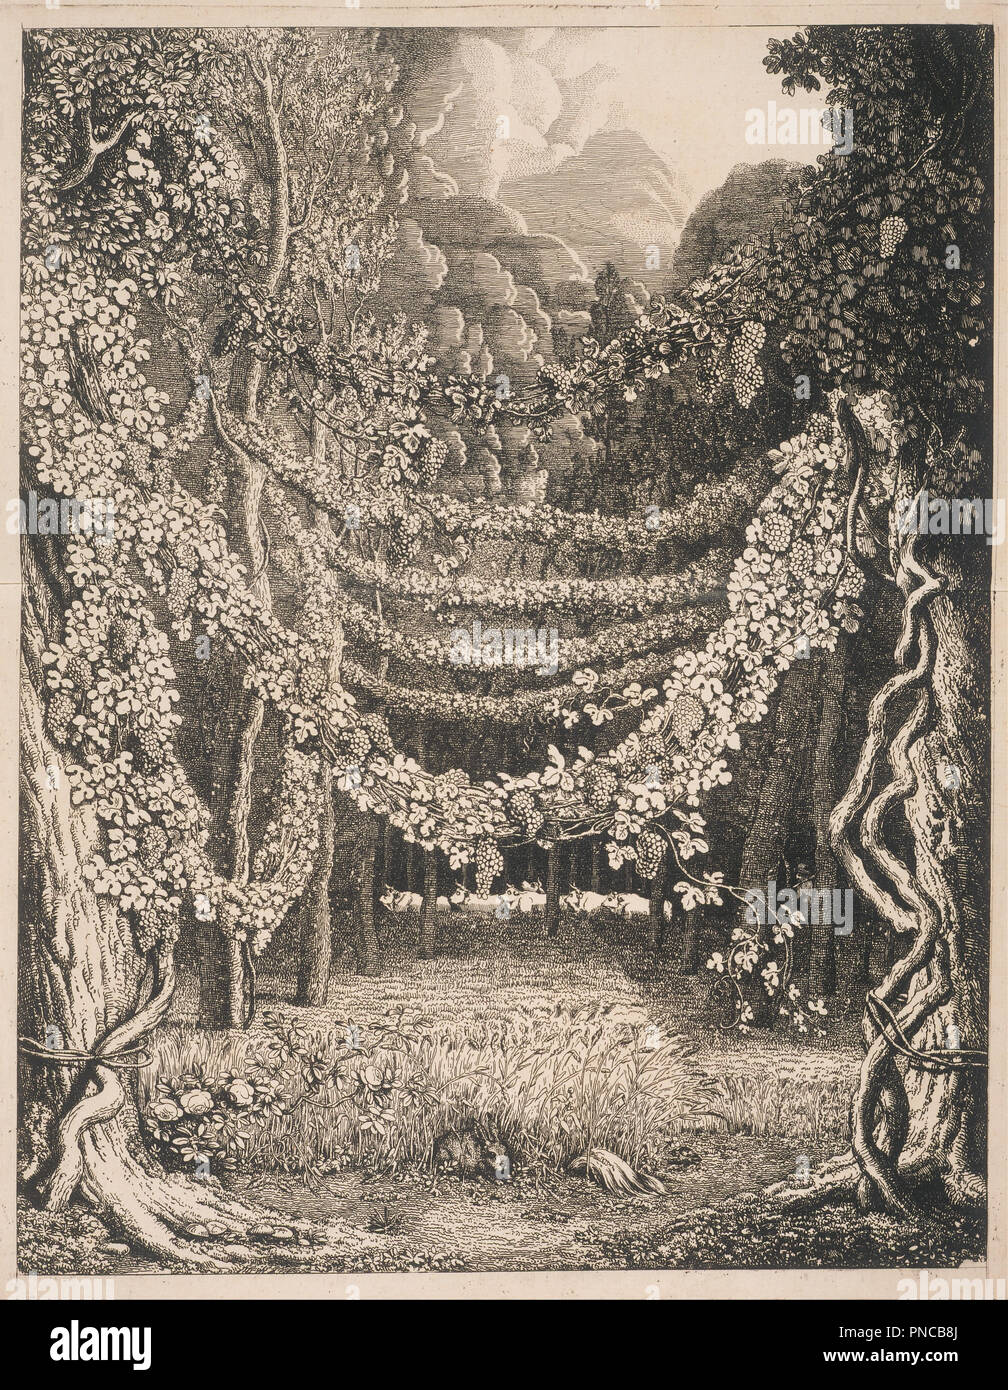 Imaginary View of a Vineyard along the Way to the Cave of Polyphemus. Date/Period: 1796. Print. Etching (early proof state) Etching (early proof state). Height: 452.12 mm (17.80 in); Width: 361.95 mm (14.25 in). Author: TISCHBEIN, JOHANN HEINRICH WILHELM. Stock Photo